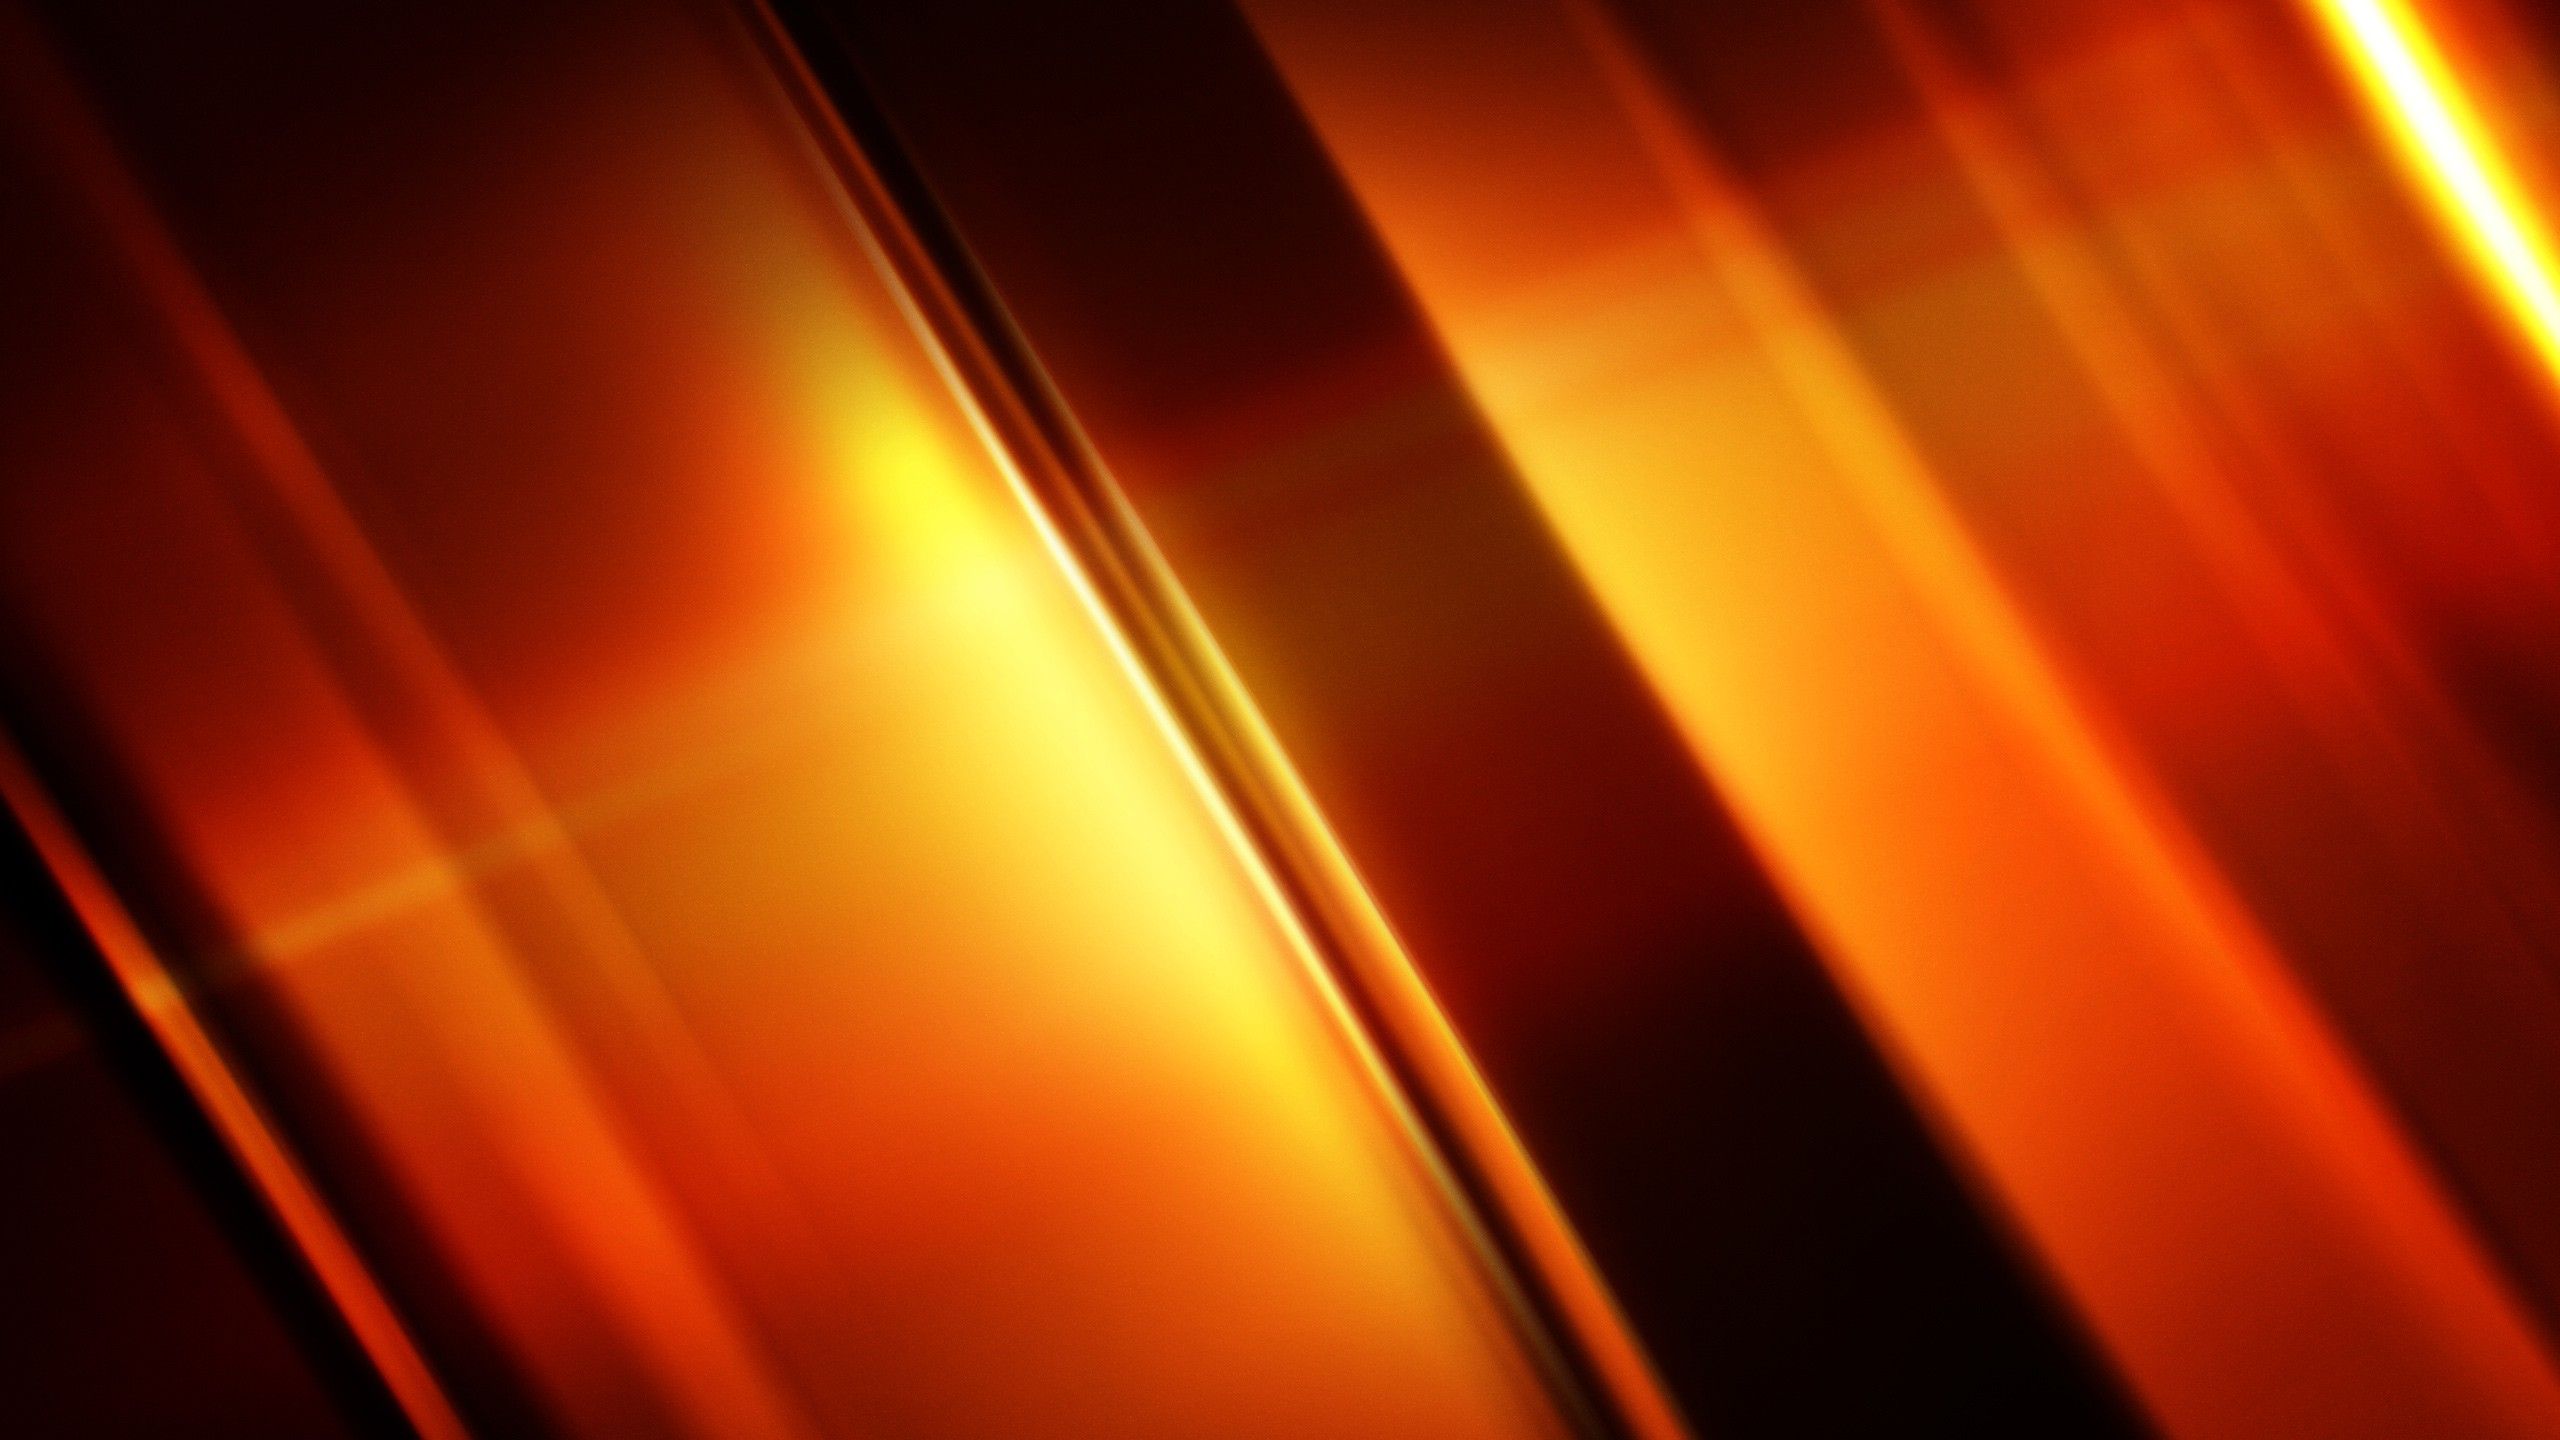 Wallpaper Golden orange, Bright, Lines, Dark, HD, Abstract,. Wallpaper for iPhone, Android, Mobile and Desktop